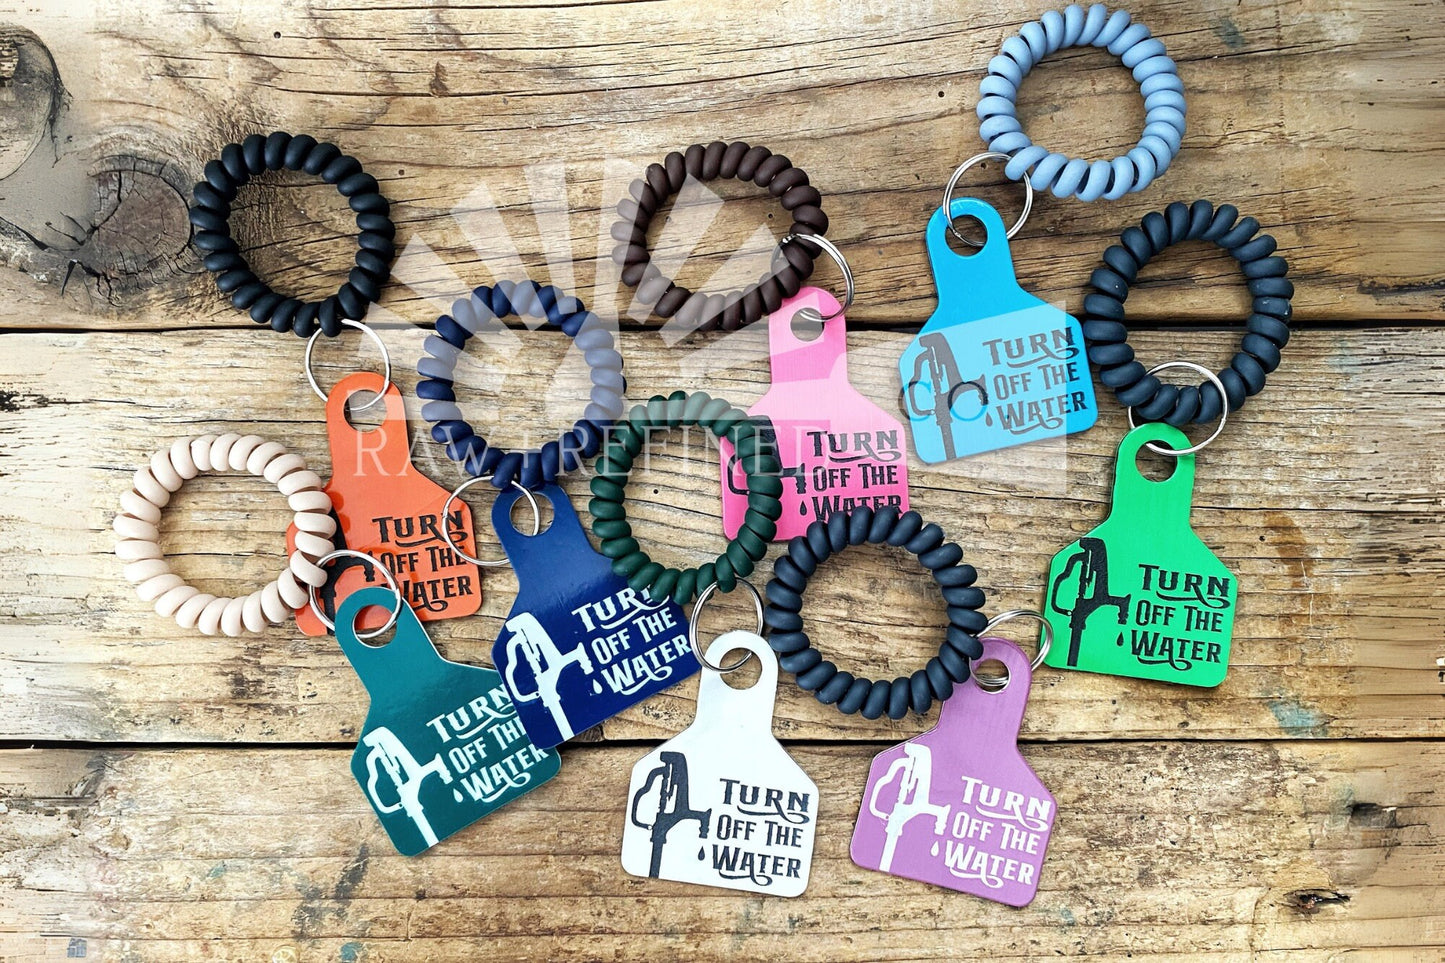 Turn Off The Water Reminder Cow Tag Keychain, Wristlet, Farmer Gift, Cattle Tag, Cow Tag, Horse Gift